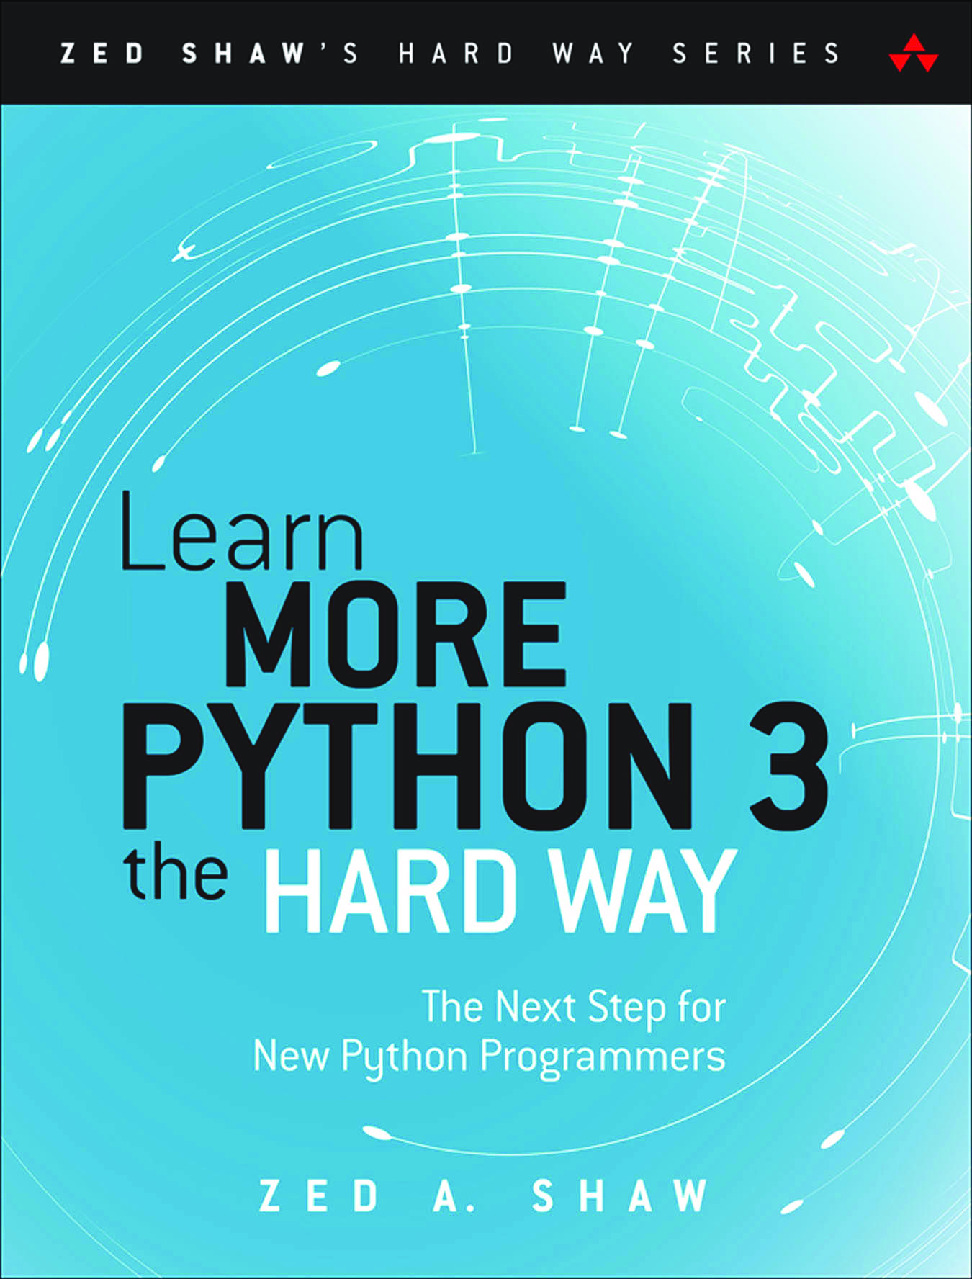 Learn More Python 3 the Hard Way – The Next Step for New Python Programmers